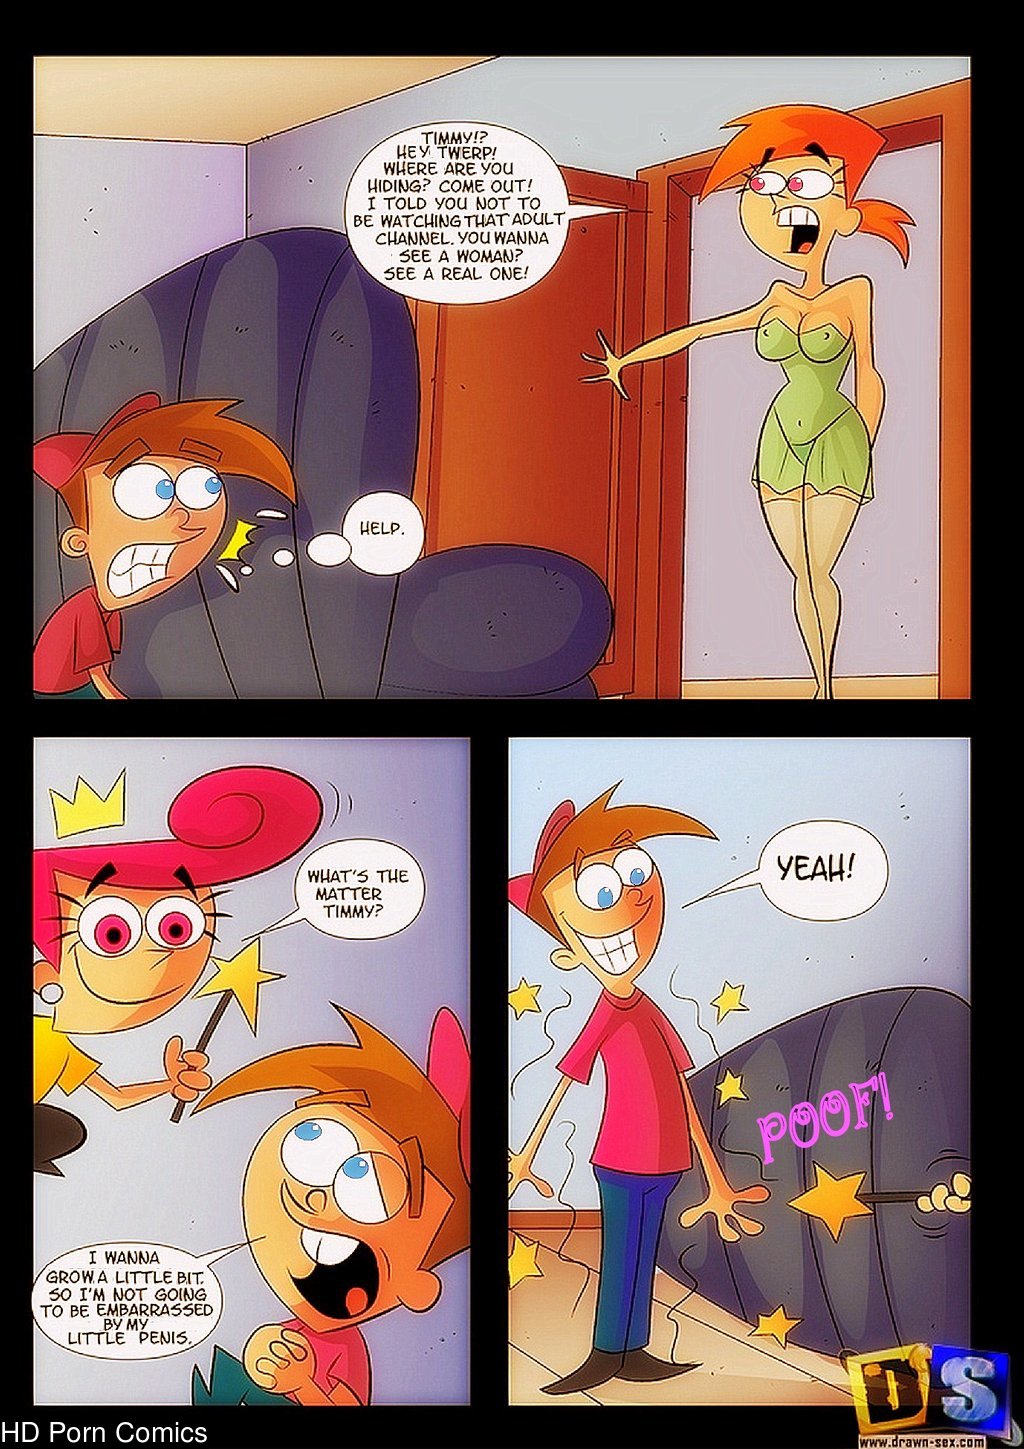 Fairly Oddparents Poof Porn - Fairly Odd Parents in Timmy's Growth Spurt! comic porn - HD Porn Comics